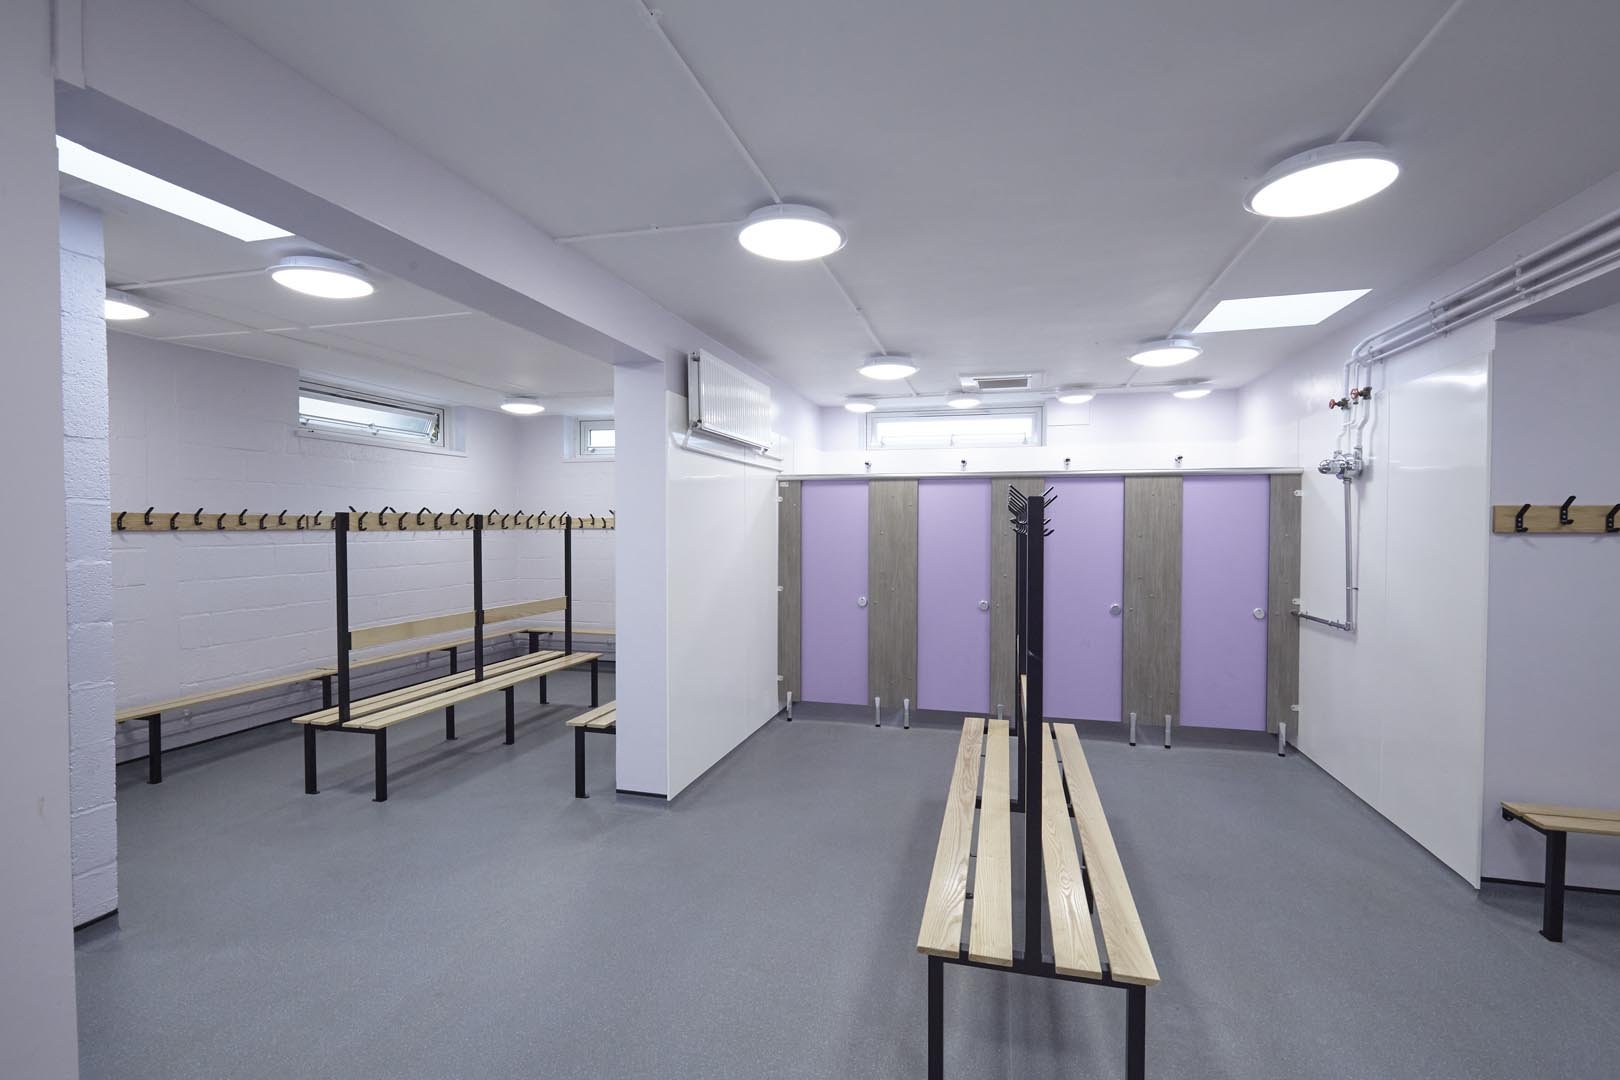 changing room with shower cubicles in purple and benching at churchmead school.jpg